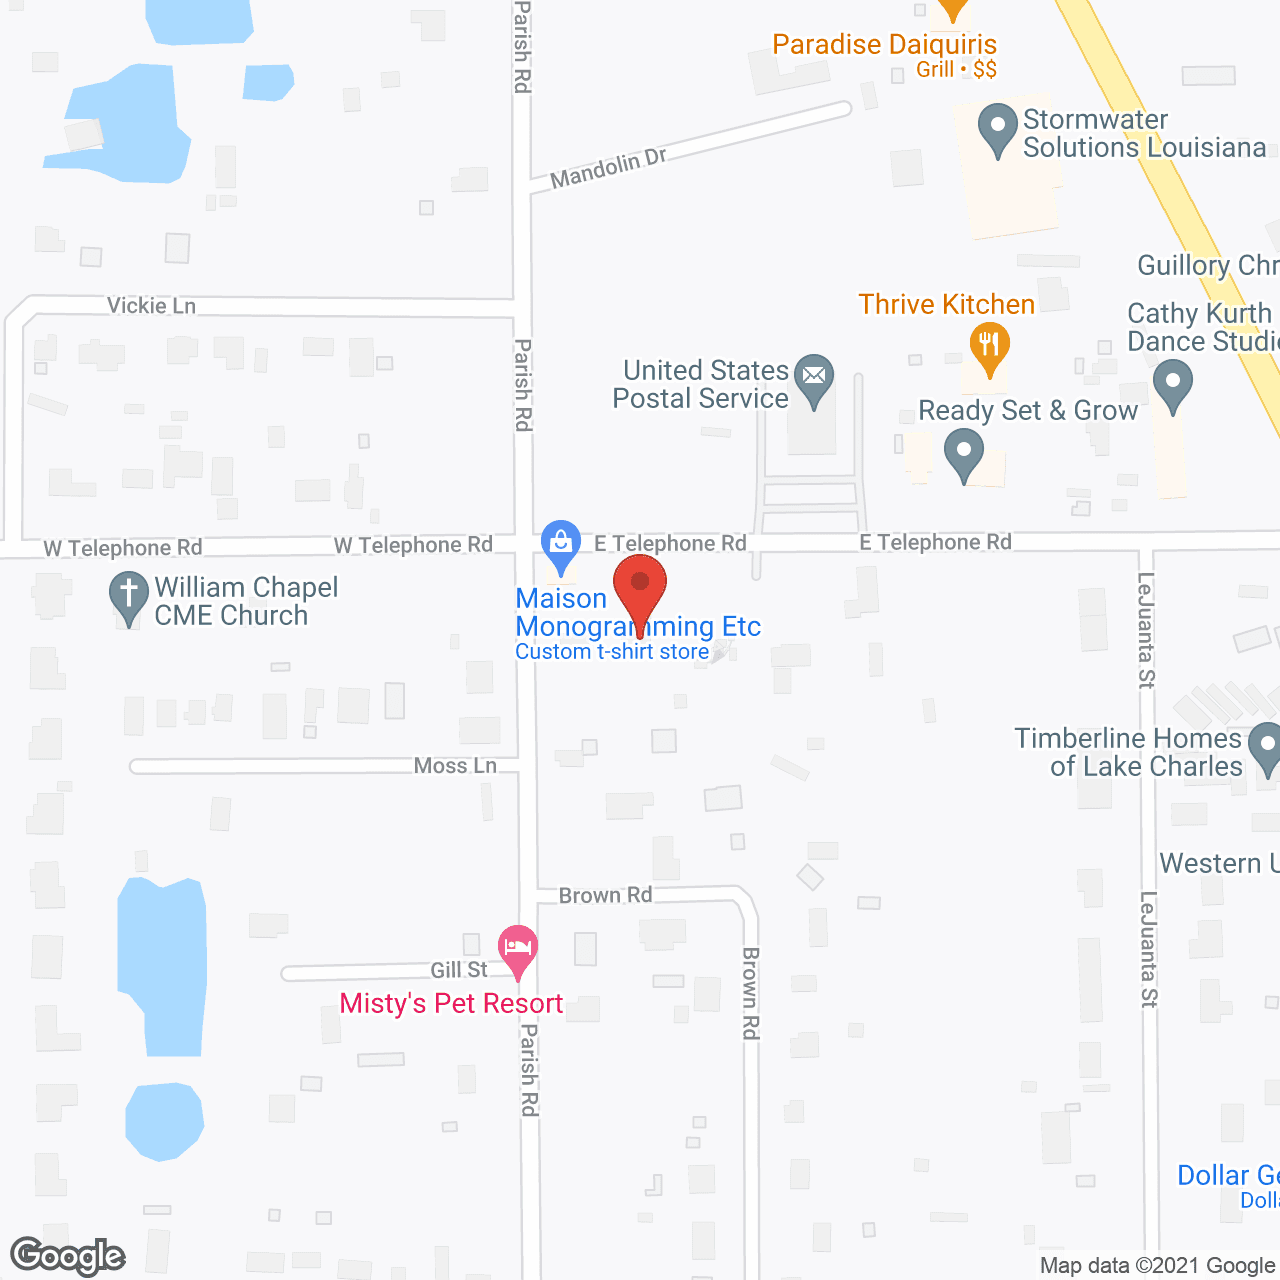 Home Health Care 2000 in google map